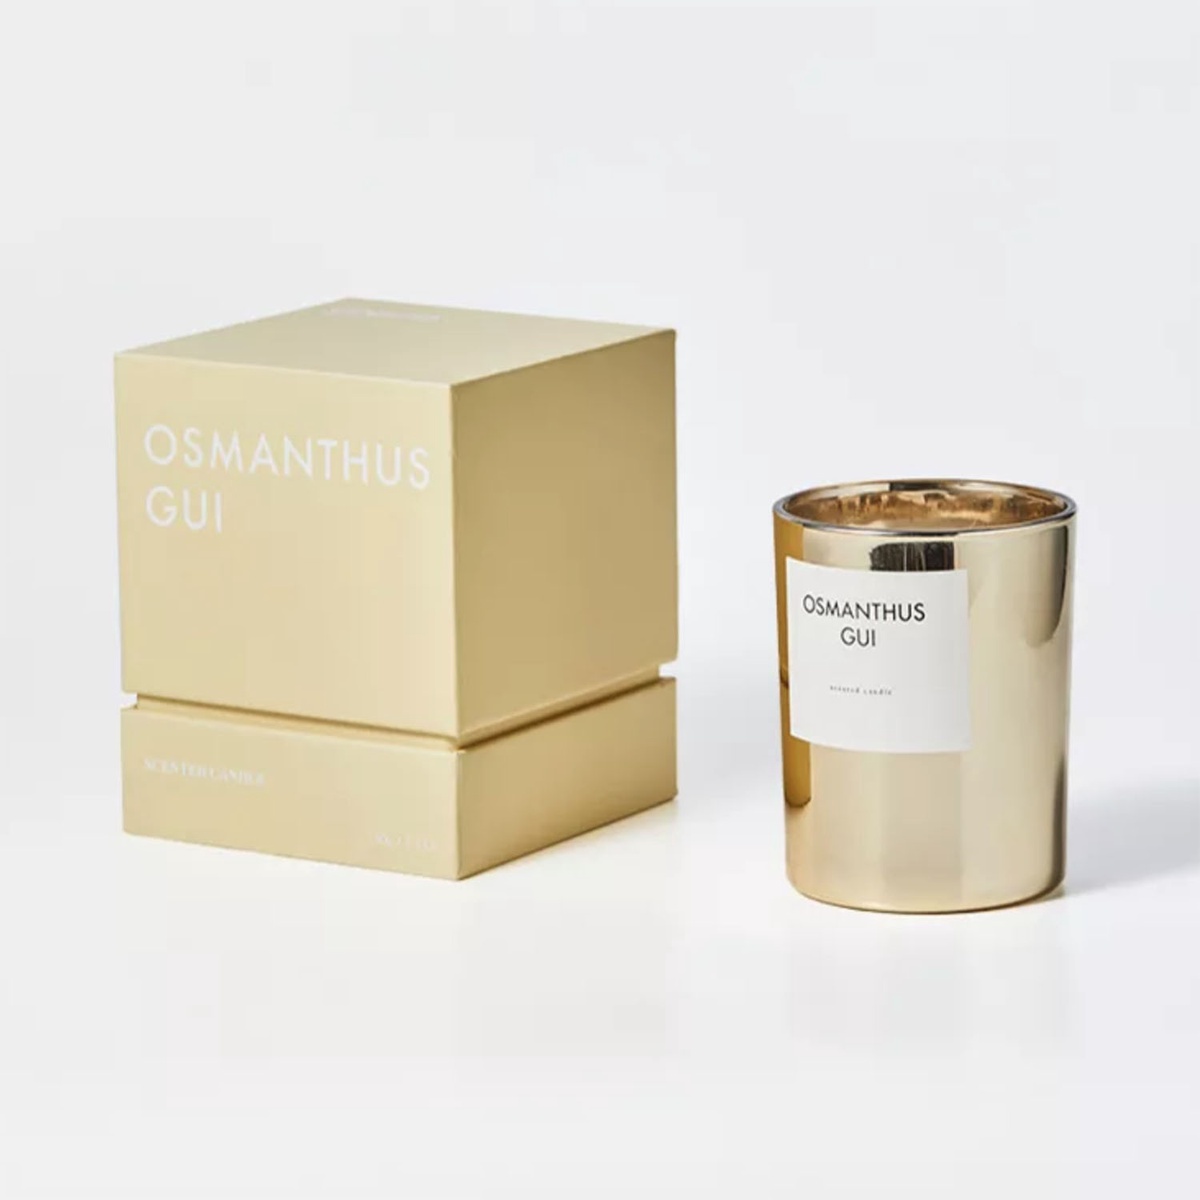 Why Luxury Candle Boxes are So Important?